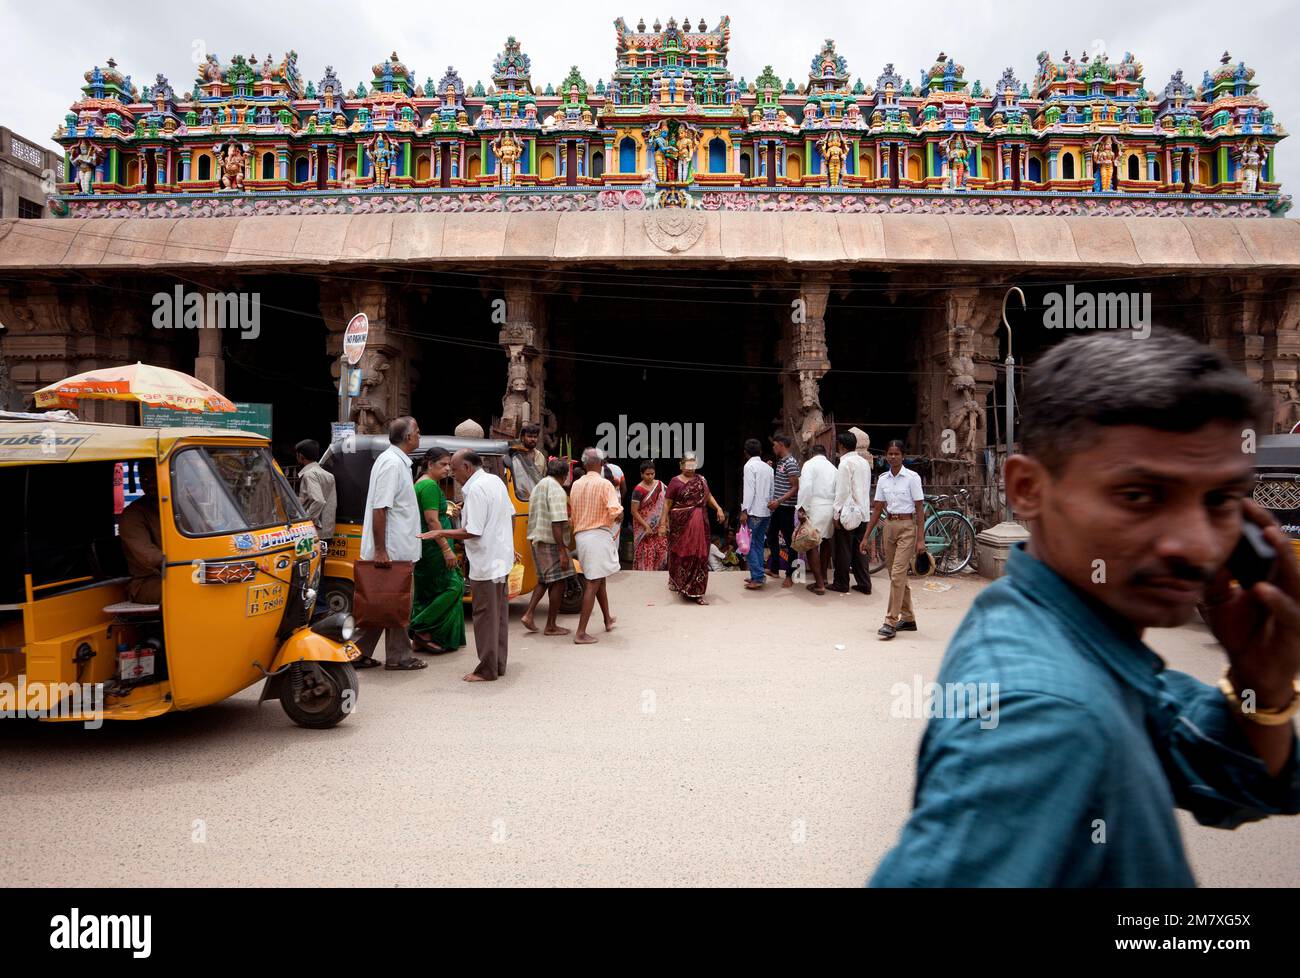 Madurai, India-September 11, 2012. A street in front of the the Sri Meenakshi Hindu Temple where many parishioners and pilgrims visit every day. Stock Photo